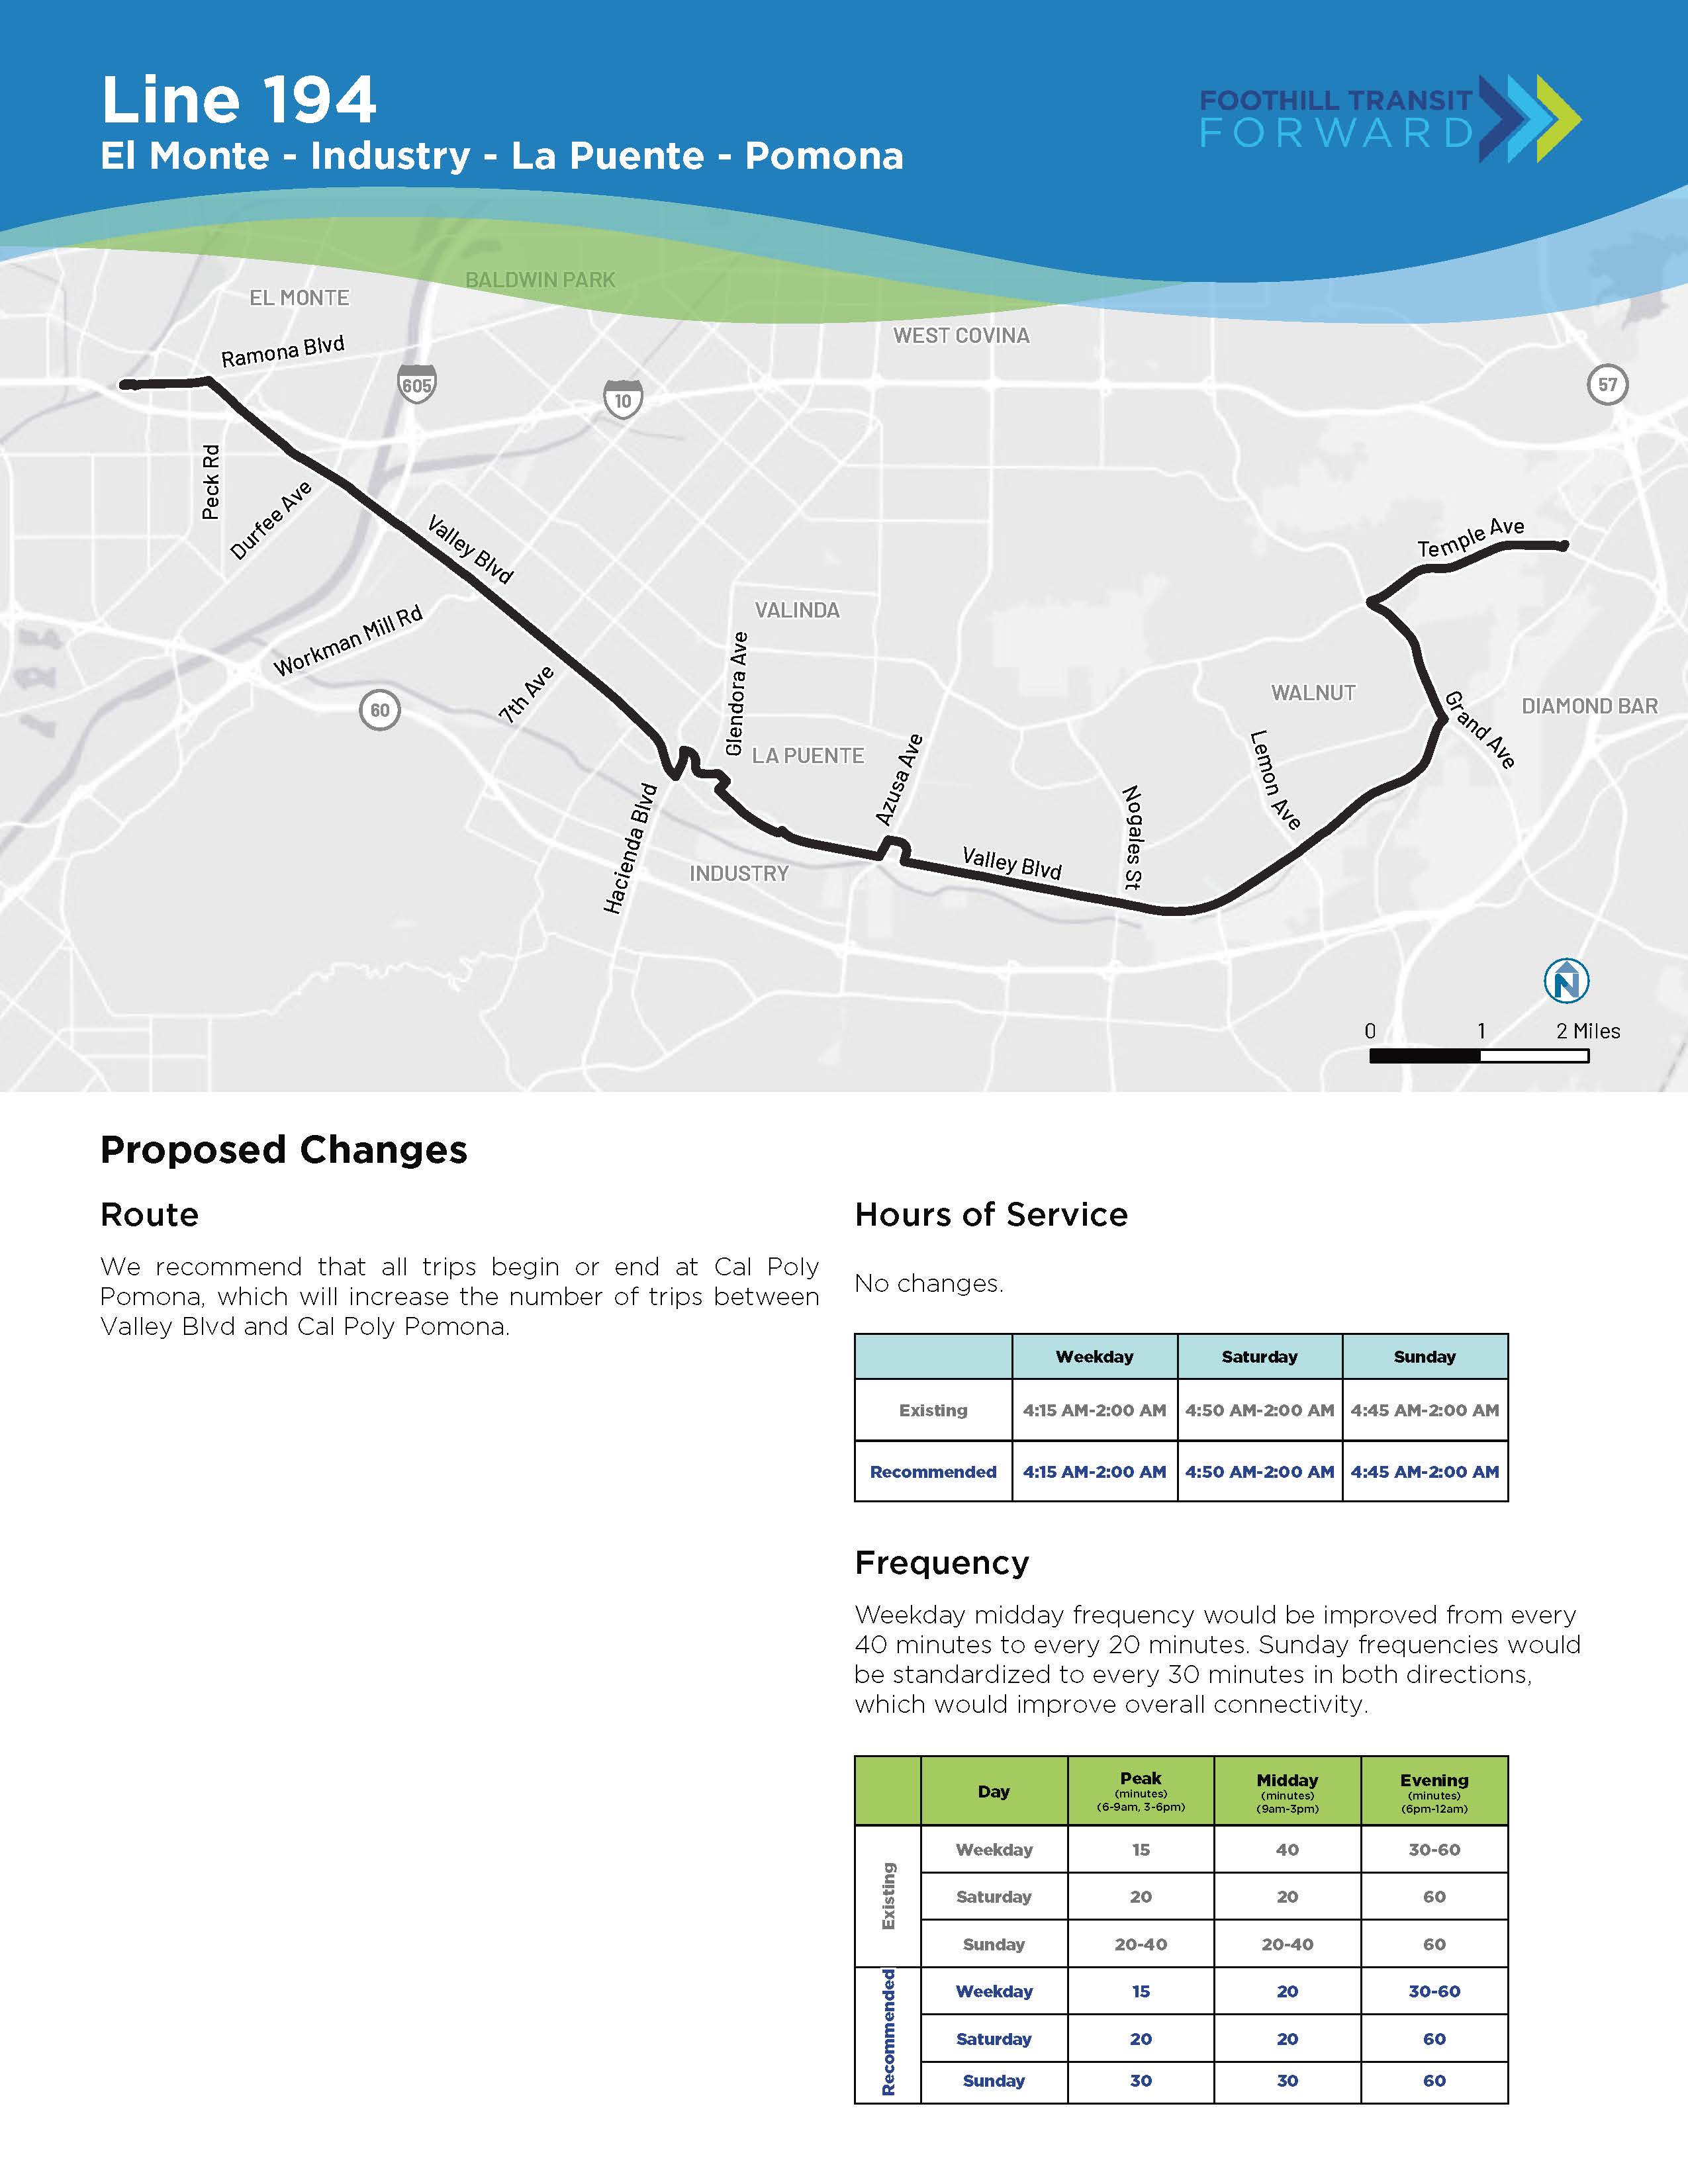 Proposed Changes Coverage All trips would begin or end at Cal Poly Pomona, which will increase the number of trips between Valley Boulevard and Cal Poly Pomona. No changes to Hours of Service. Weekday midday frequency would be improved from every 40 minutes to every 20 minutes. Sunday frequencies would be “balanced” to every 30 minutes in both directions, which would improve overall connectivity considering current service is 20 minutes in one direction and 40 minutes in the other direction.